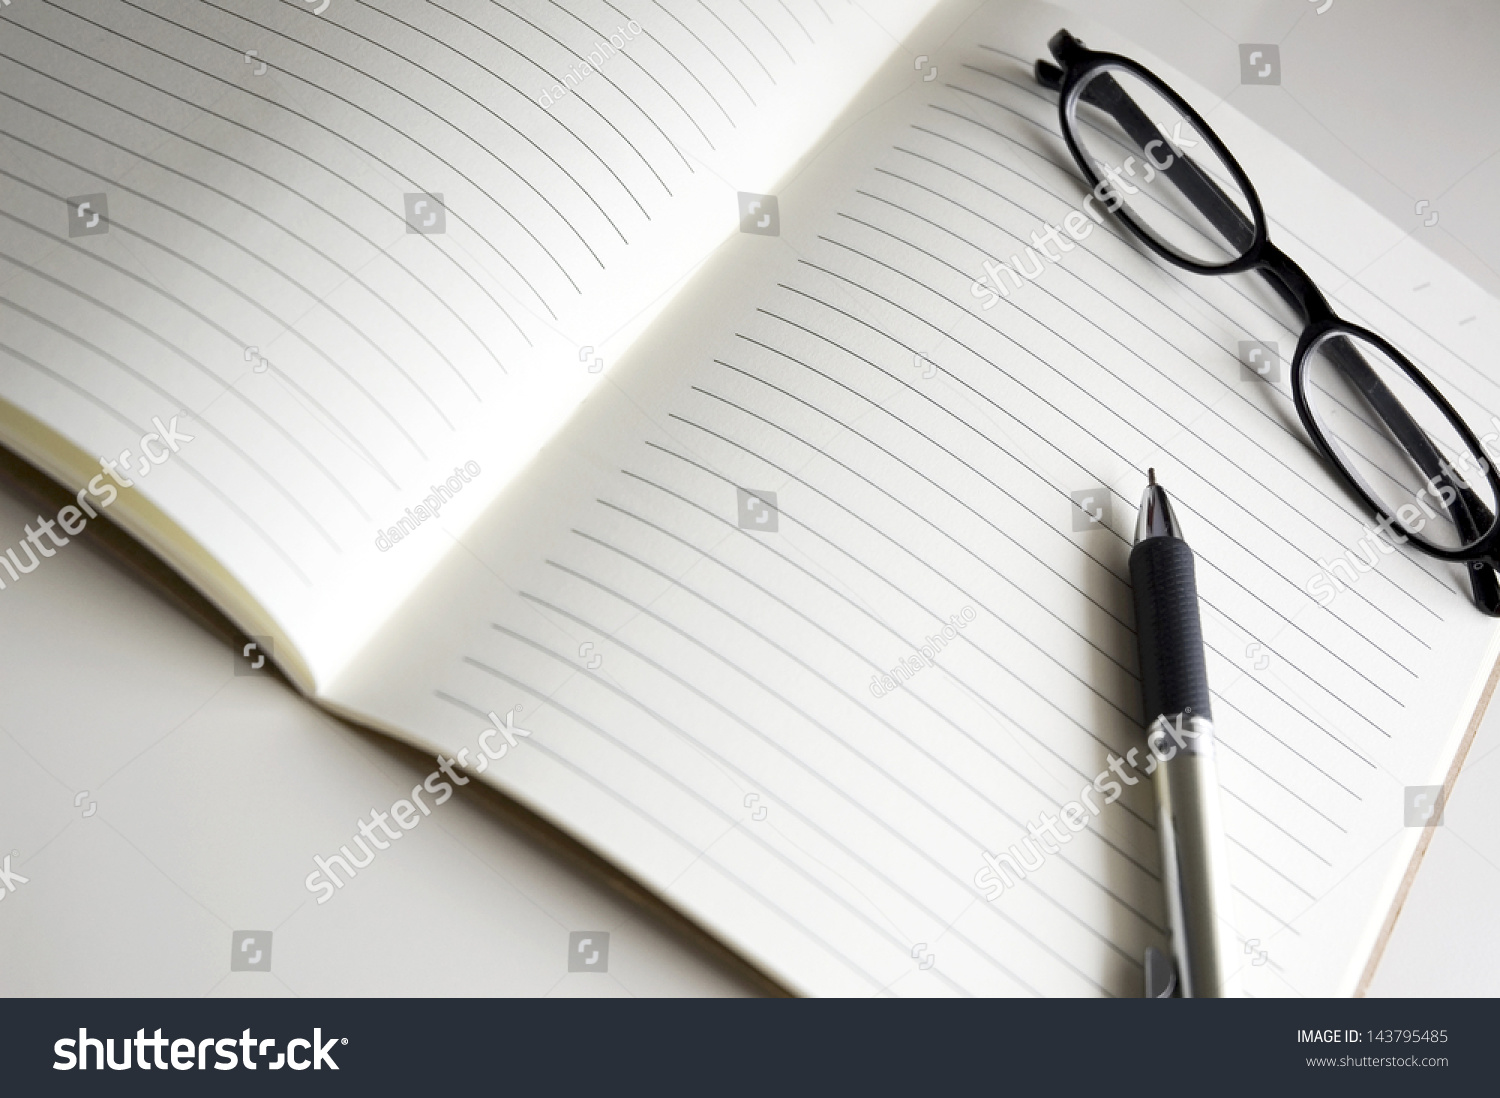 blank notebook pages with pen and glasses #143795485